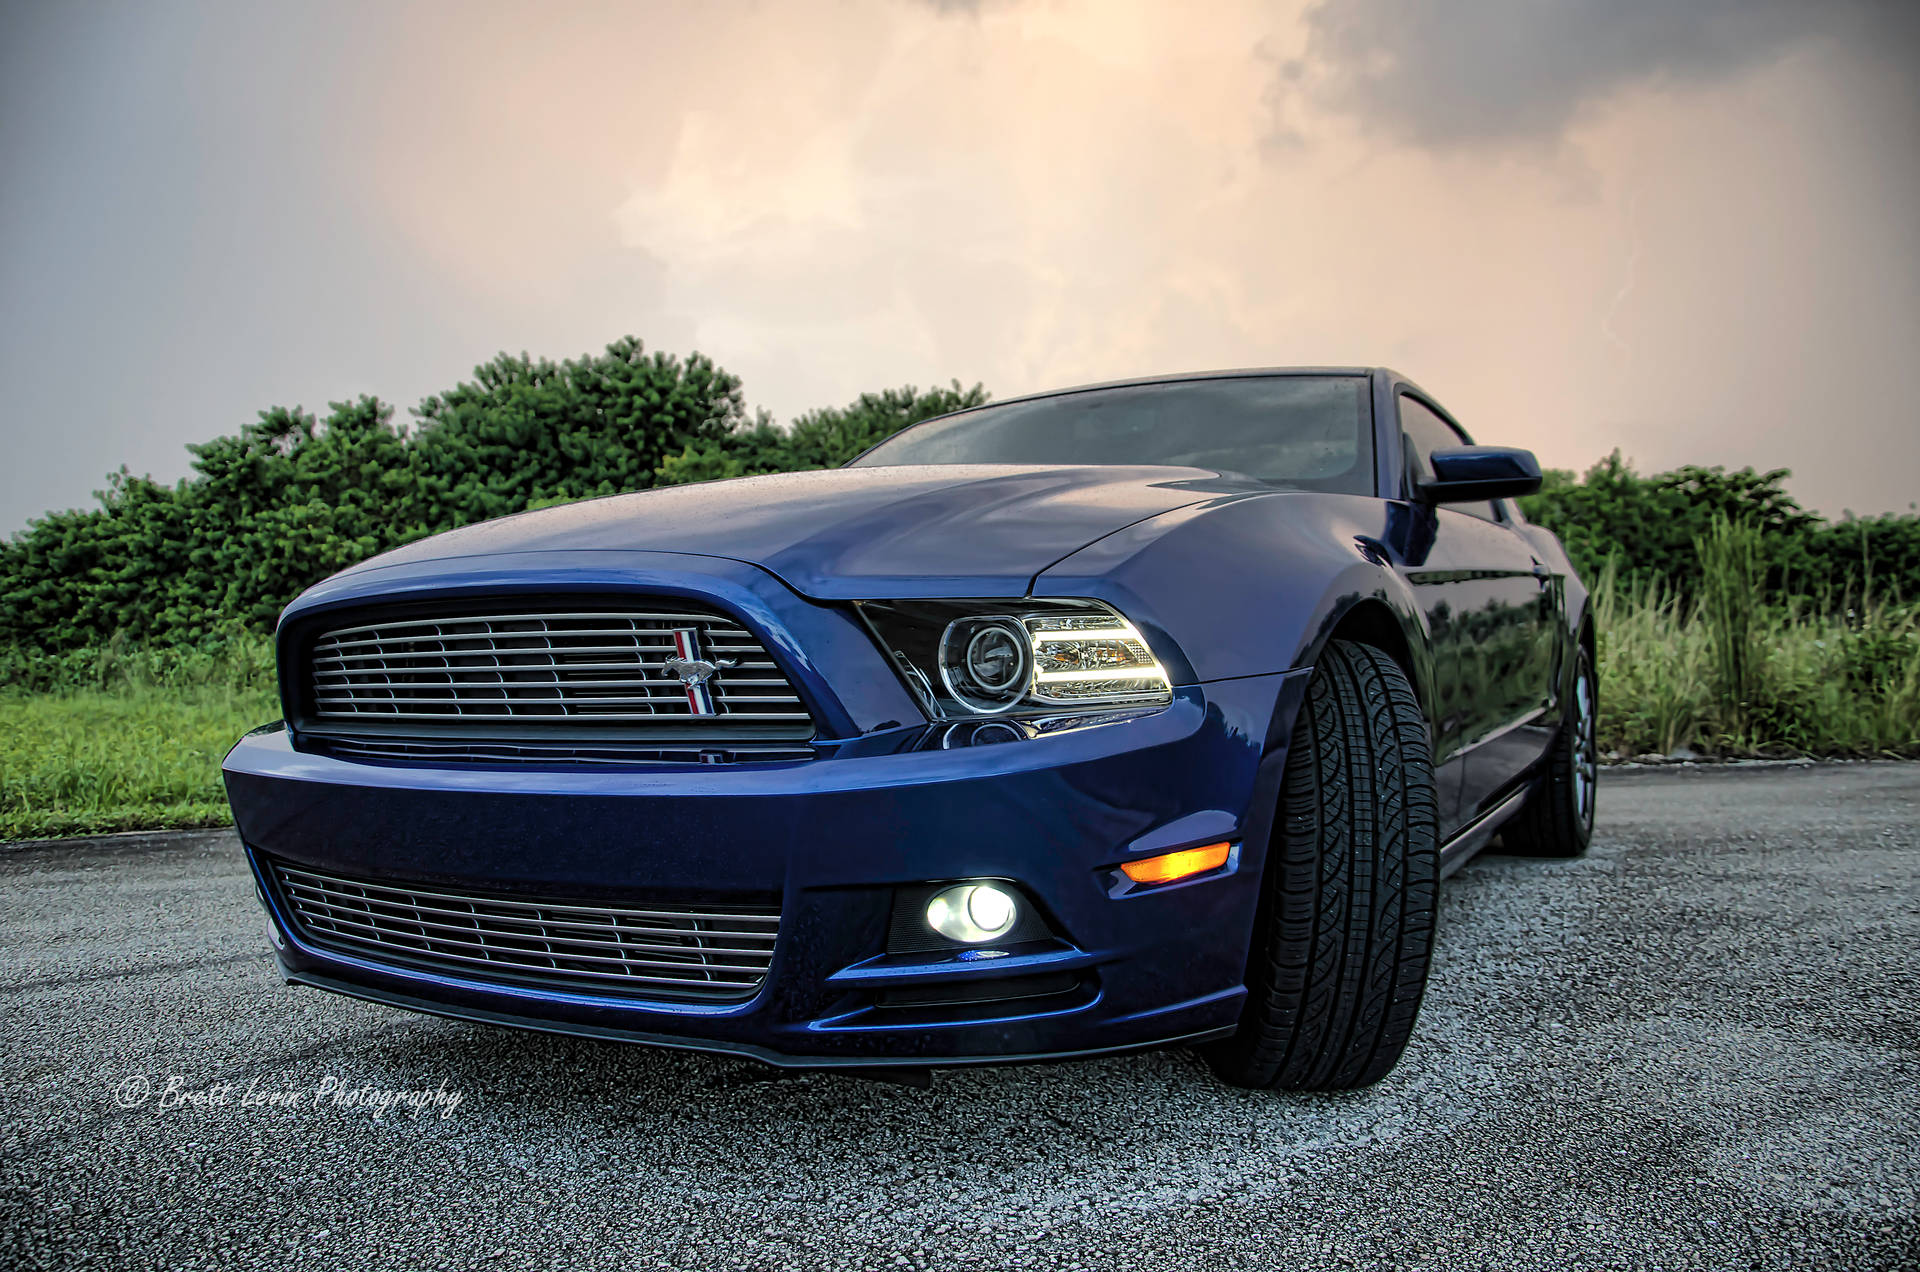 Mustang 4928X3264 Wallpaper and Background Image